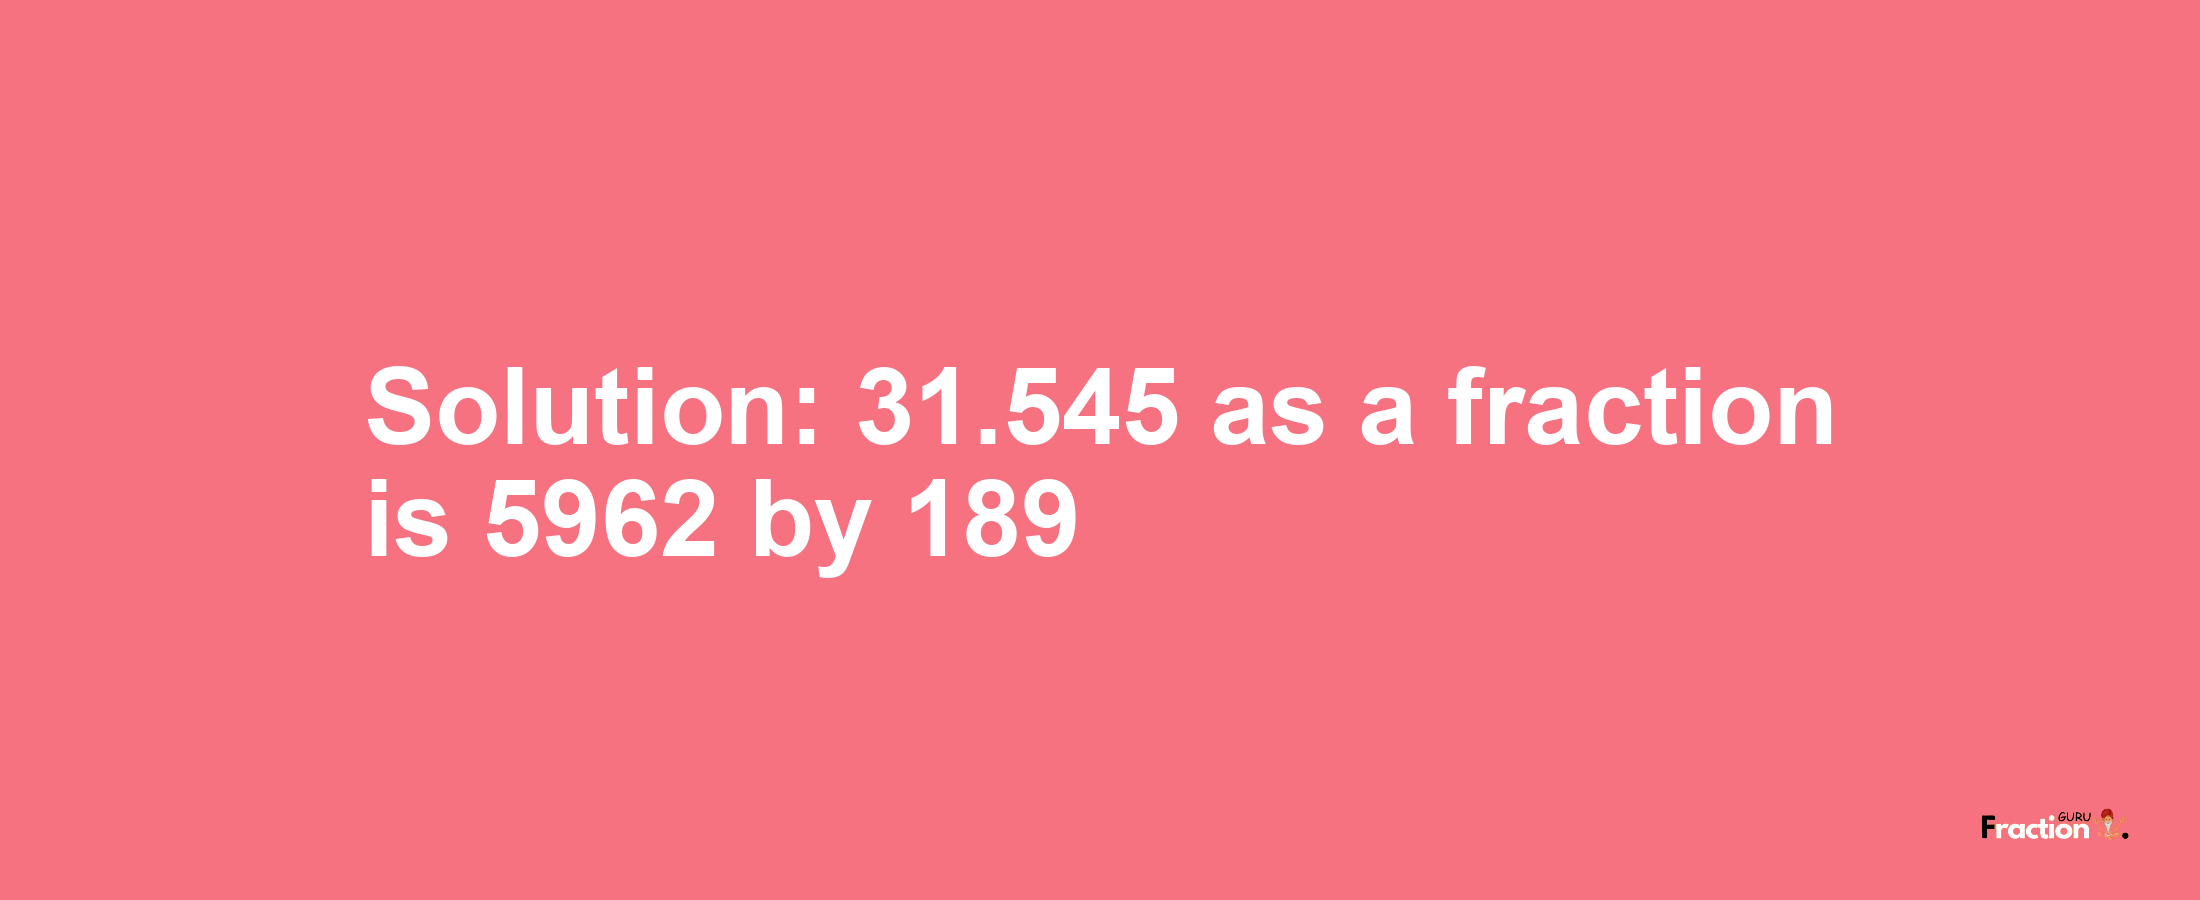 Solution:31.545 as a fraction is 5962/189